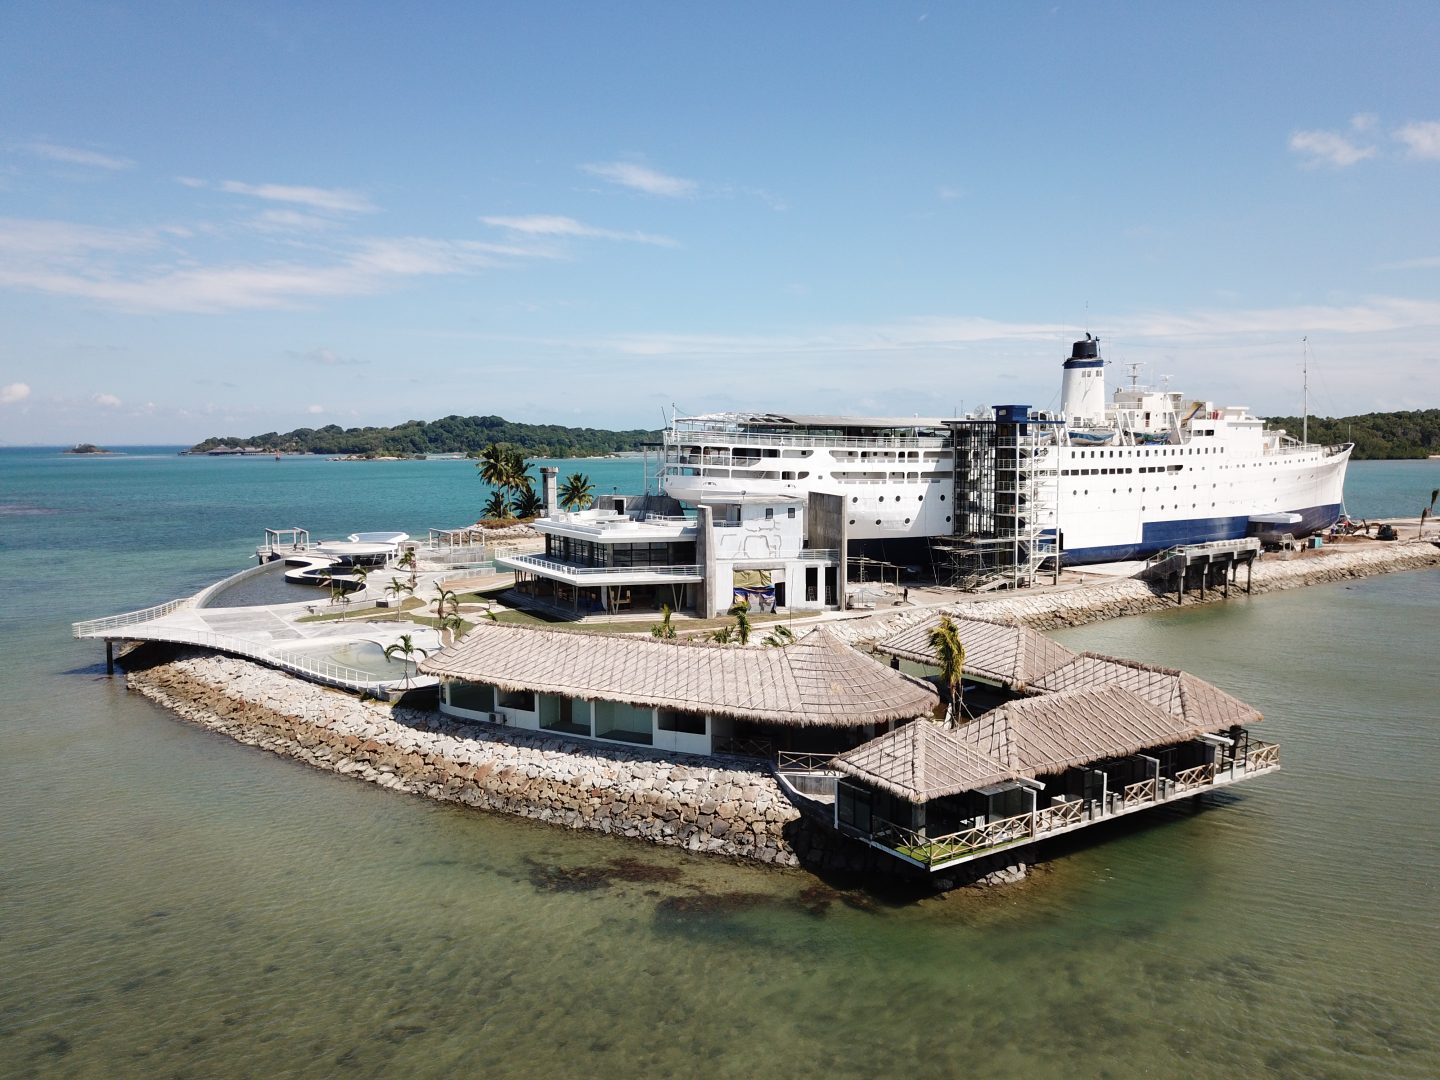 After almost a decade of planning and refurbishment, Doulos Phos now sits on a 1.4-hectare site beside the Bandar Bentan Telani ferry terminal in Bintan, Indonesia, just an hour's ferry ride away from Singapore. As a tribute to its rich history, each level of the hotel is named after the different names the ship has had: Medina, Roma, Franca C and Doulos. Saw has also left several parts of the ship's old features untouched, including its engine room, which now serves as a museum. Photo courtesy of Doulos Phos.